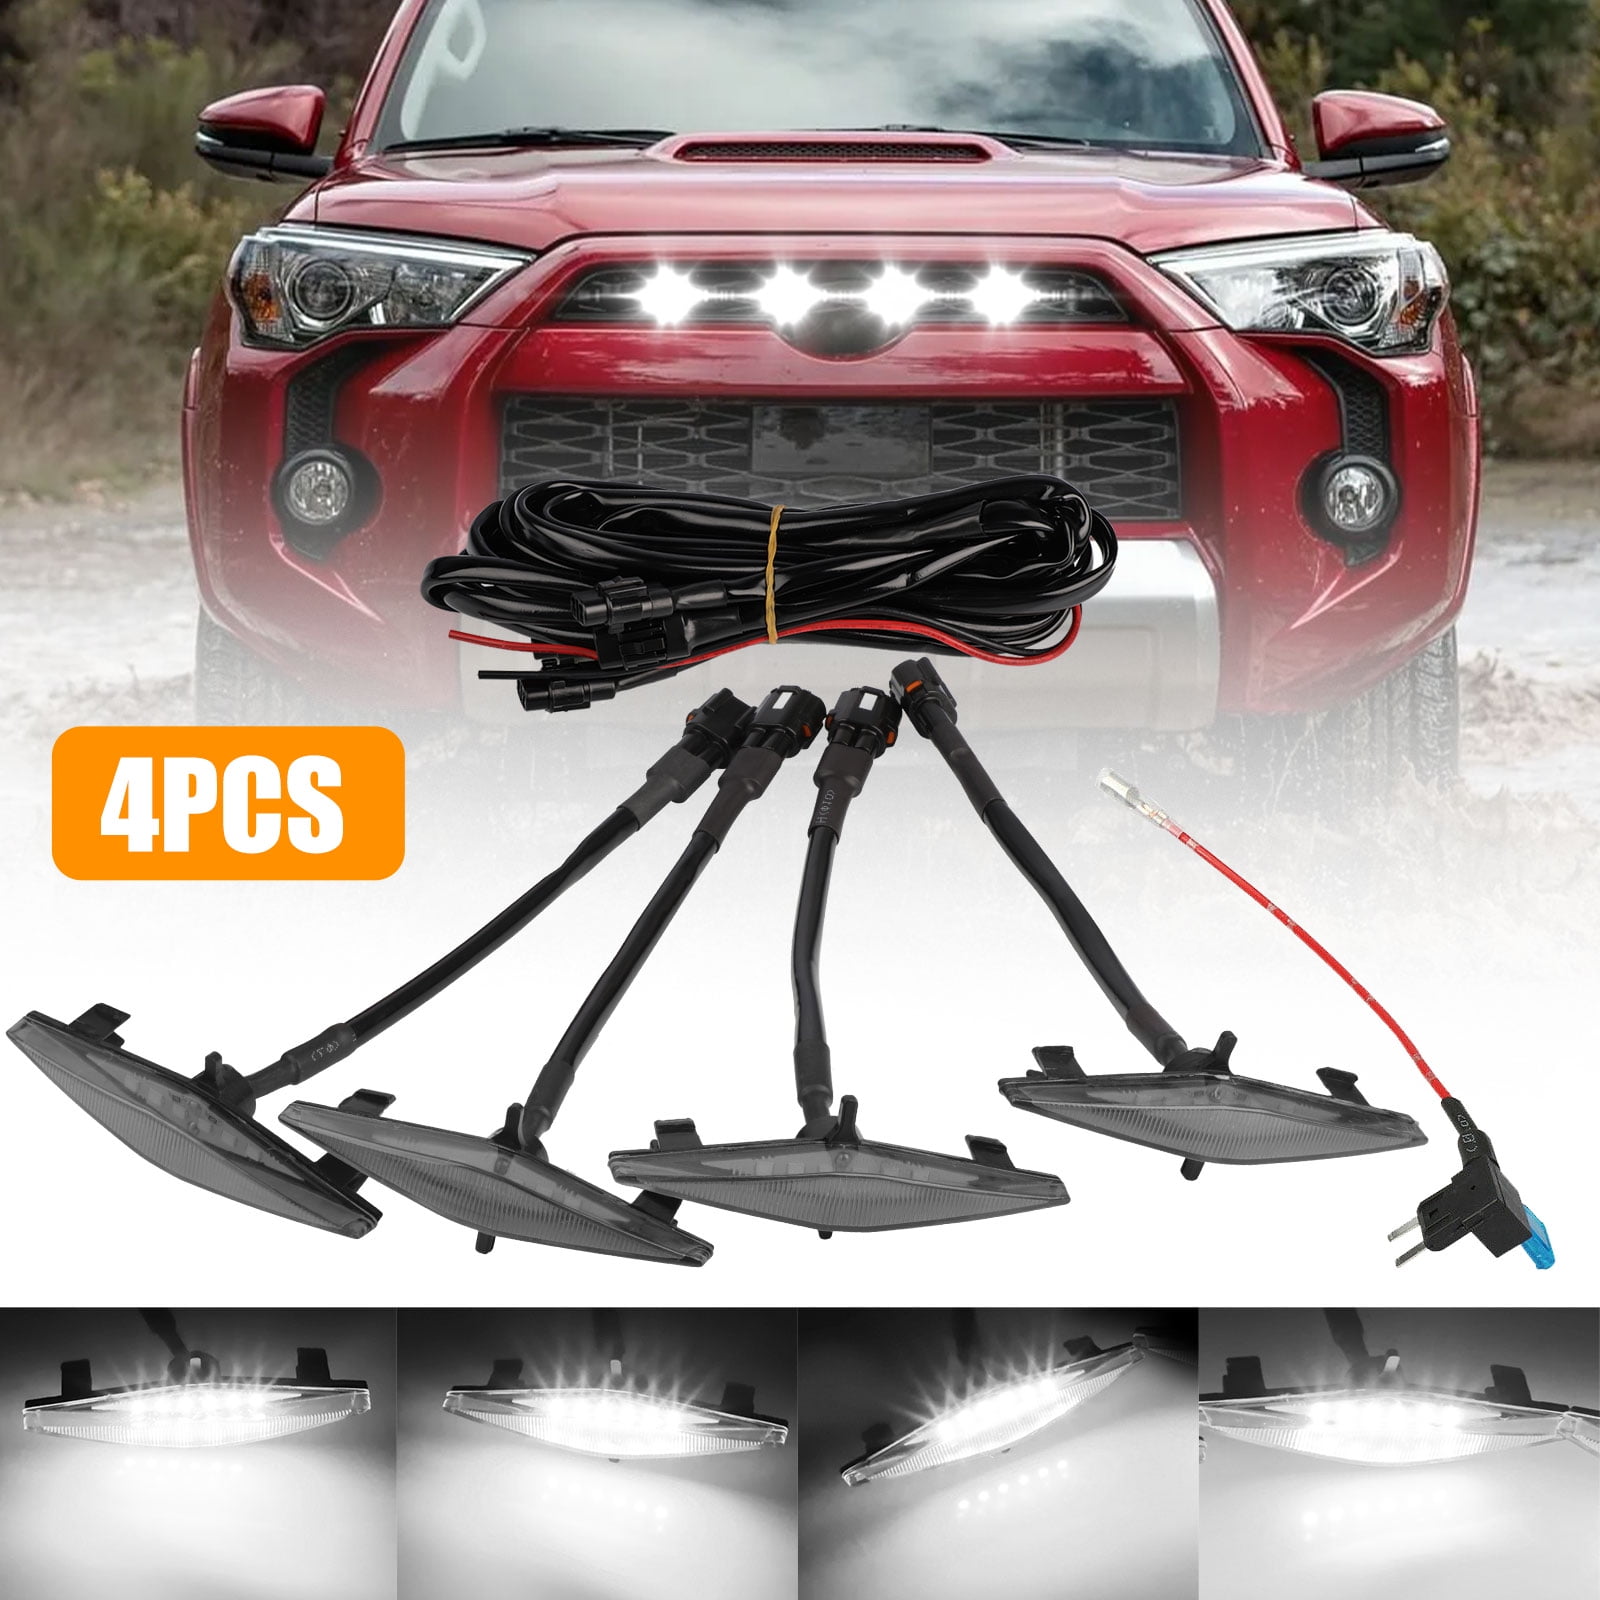 TRD off-road Including SR5 Limited 4 PCS Led Smoked Grille Lights Kits for 4Runner TRD Pro 2014-2019 TRO Pro （Smoked shell white lights）